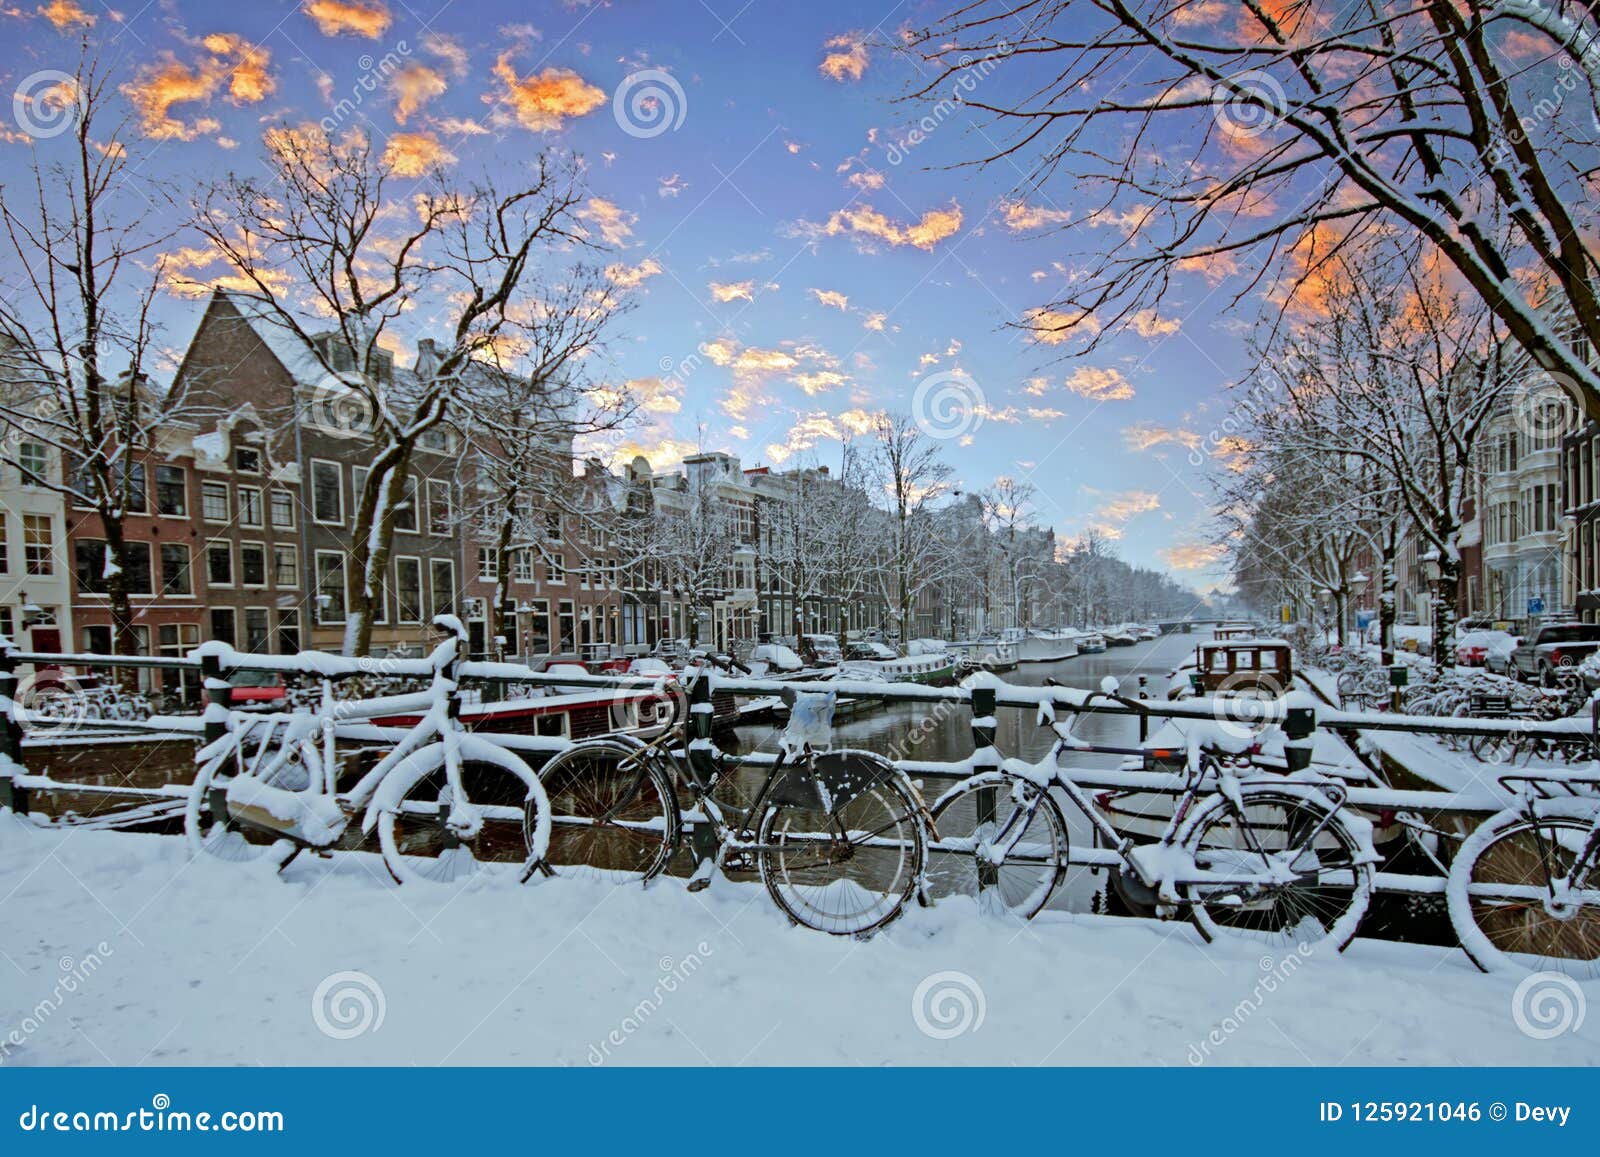 Amsterdam Covered With Snow In Winter In The Netherlands Stock Photo